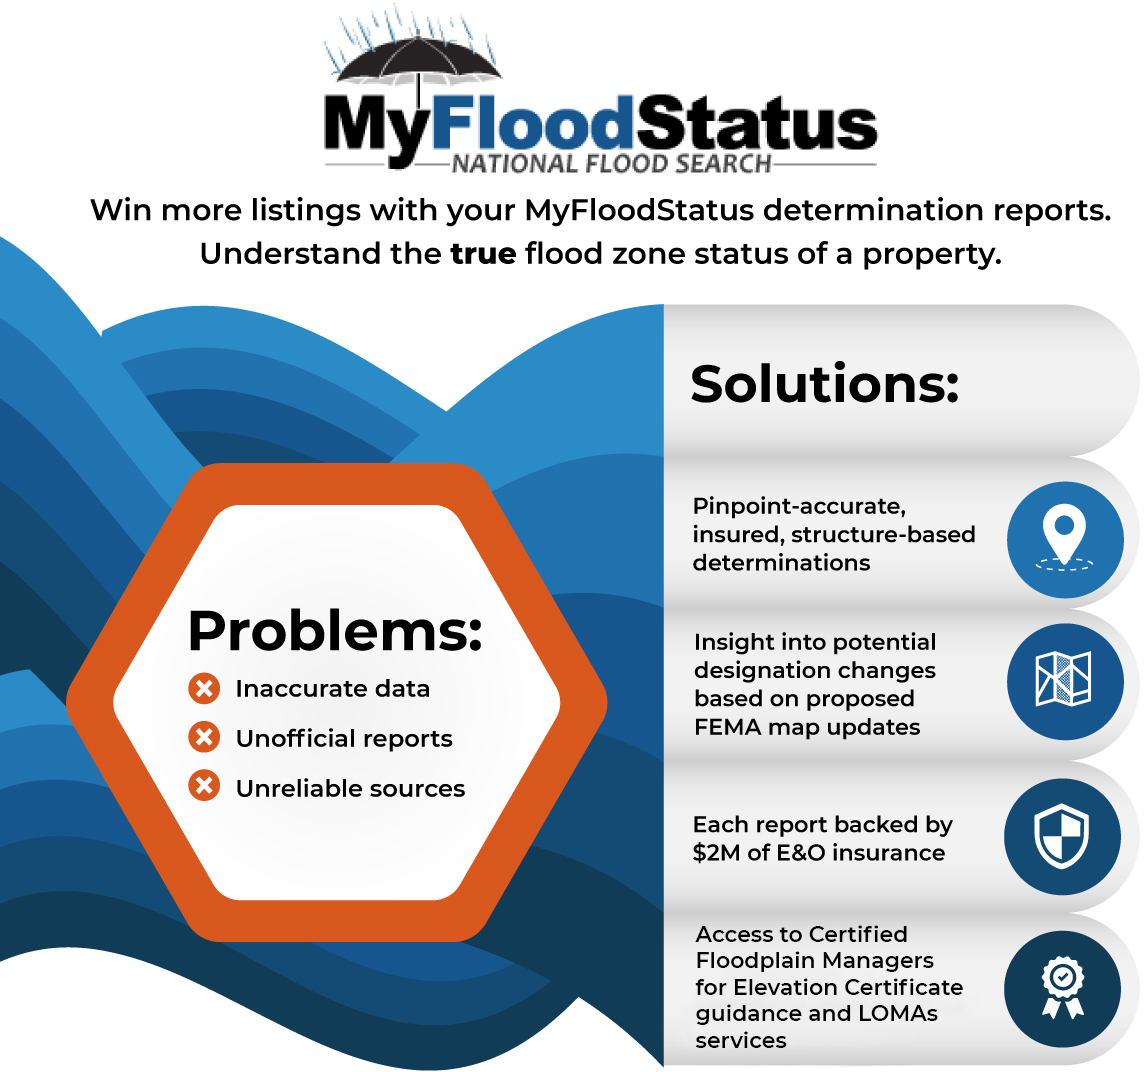 MyFloodStatus: Win more listings with your MyFloodStatus determination reports. Understand the true flood zone status of a property.